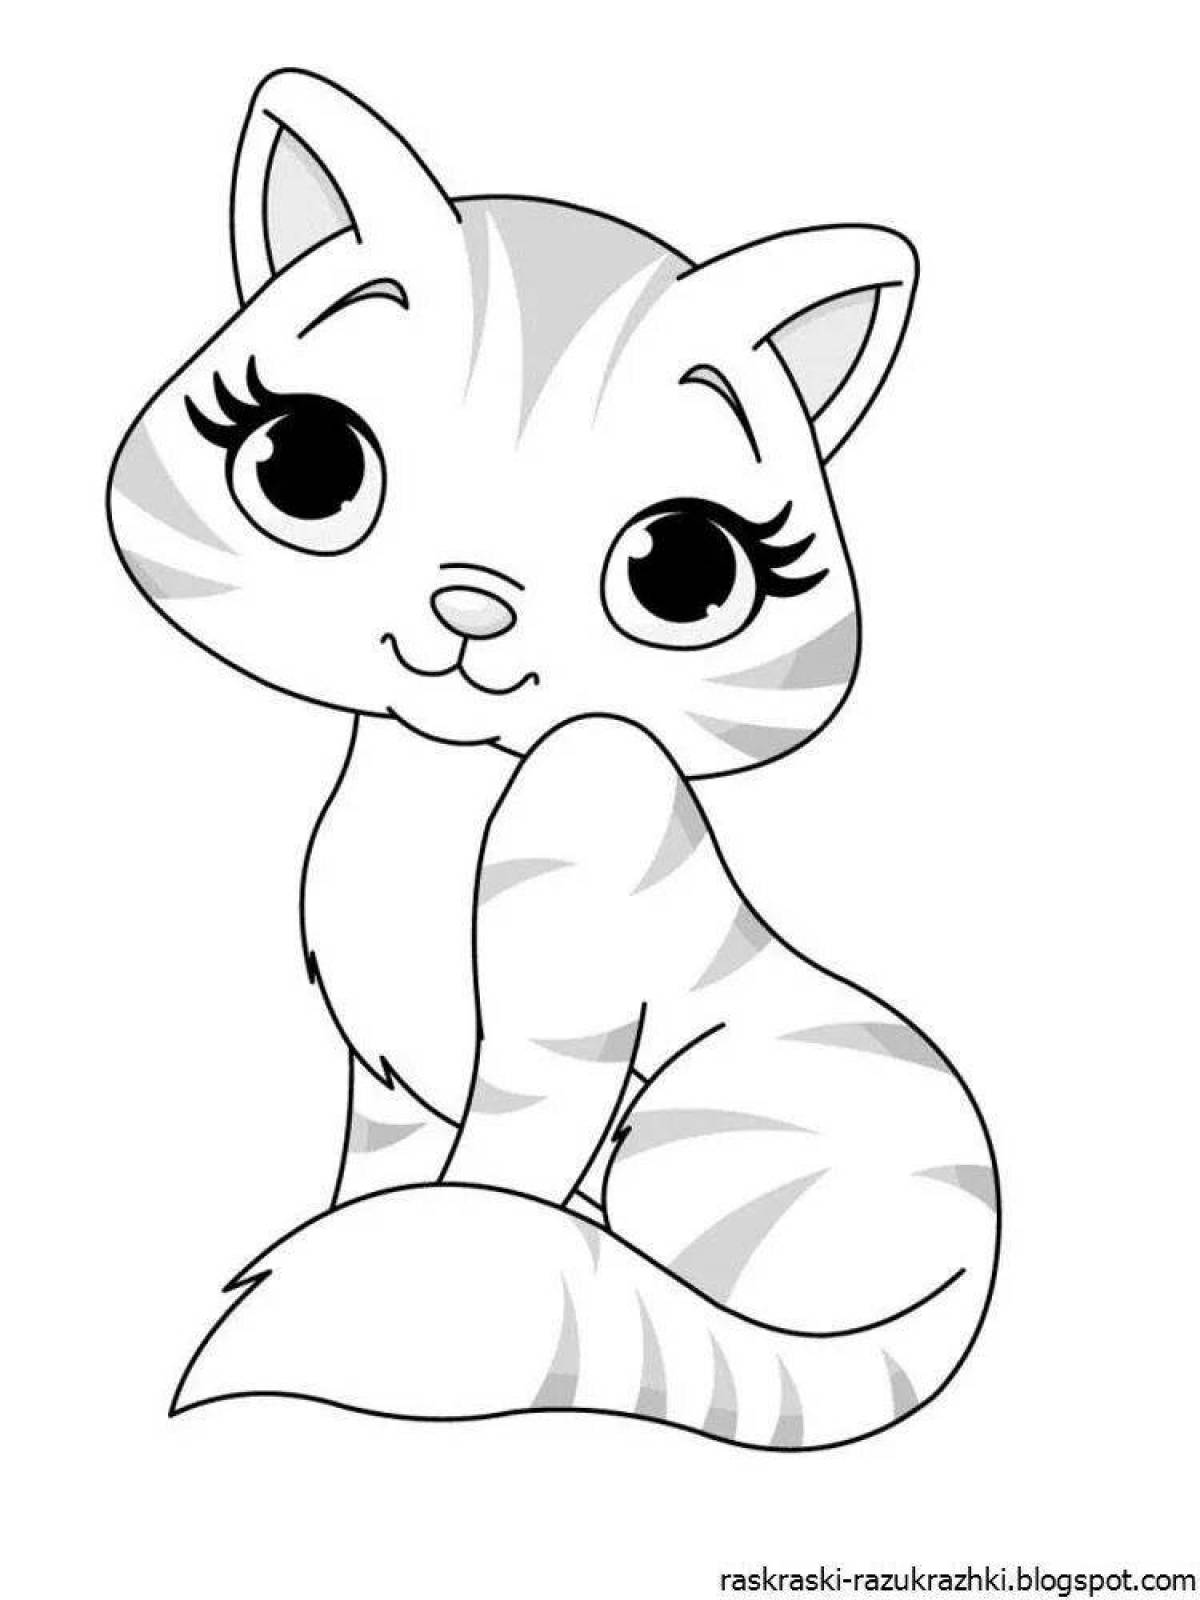 Cute and quirky cat coloring book